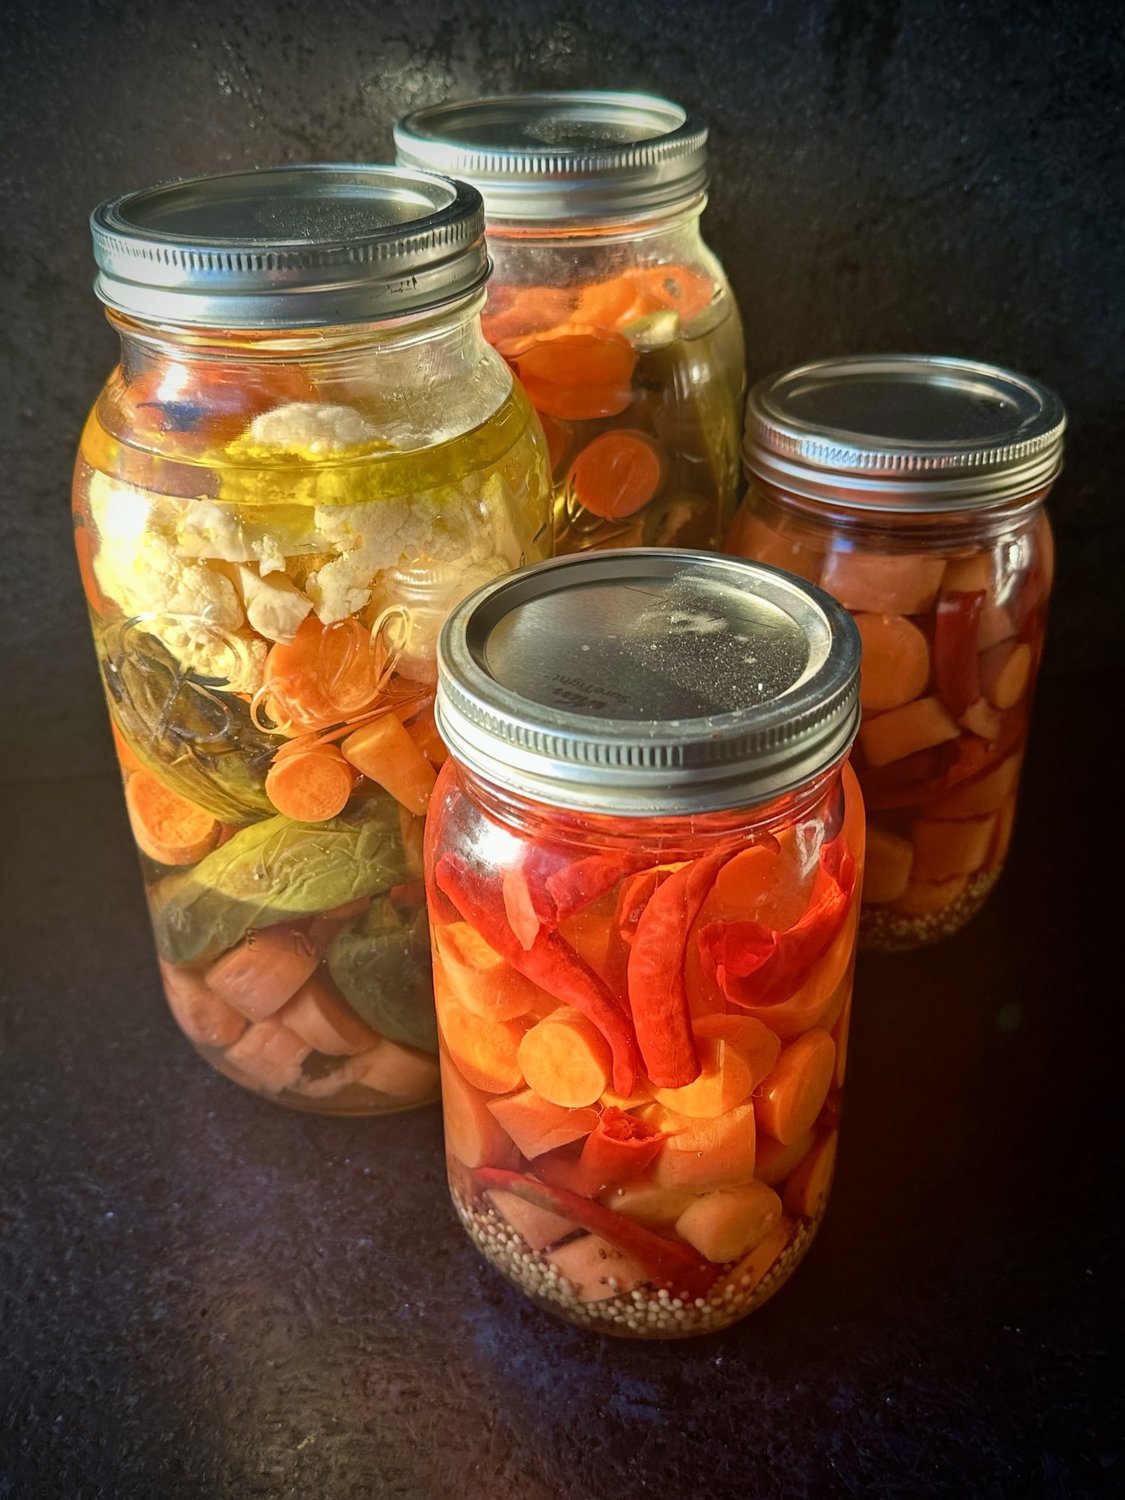 The hardest part of pickling carrots and peppers is not being able to eat them right away.